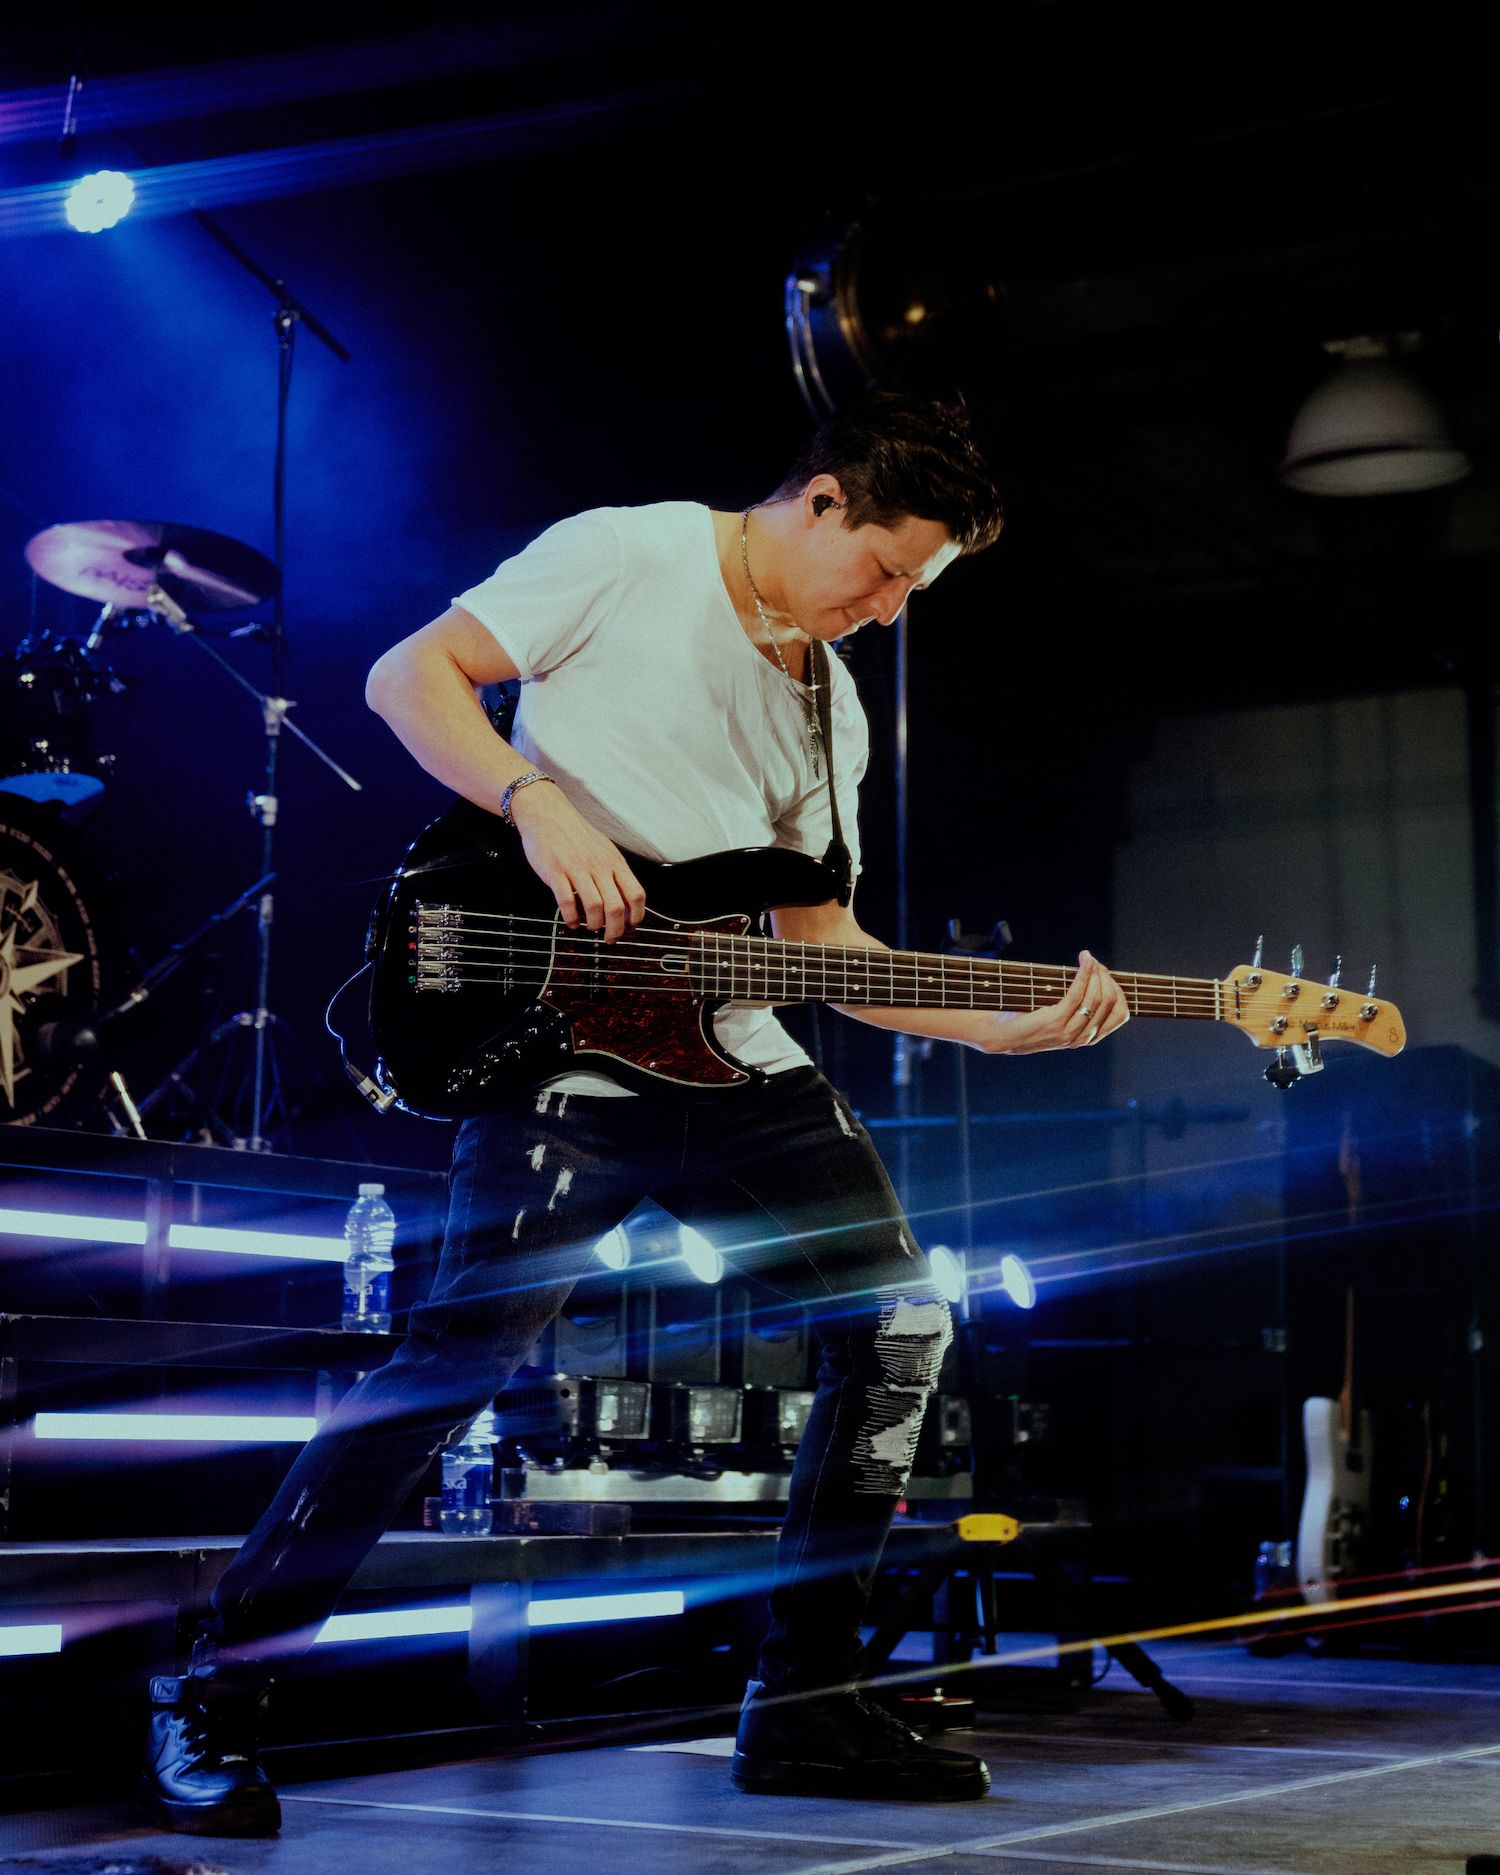 Justin Kudding wearing IEMs and playing bass during live performance.